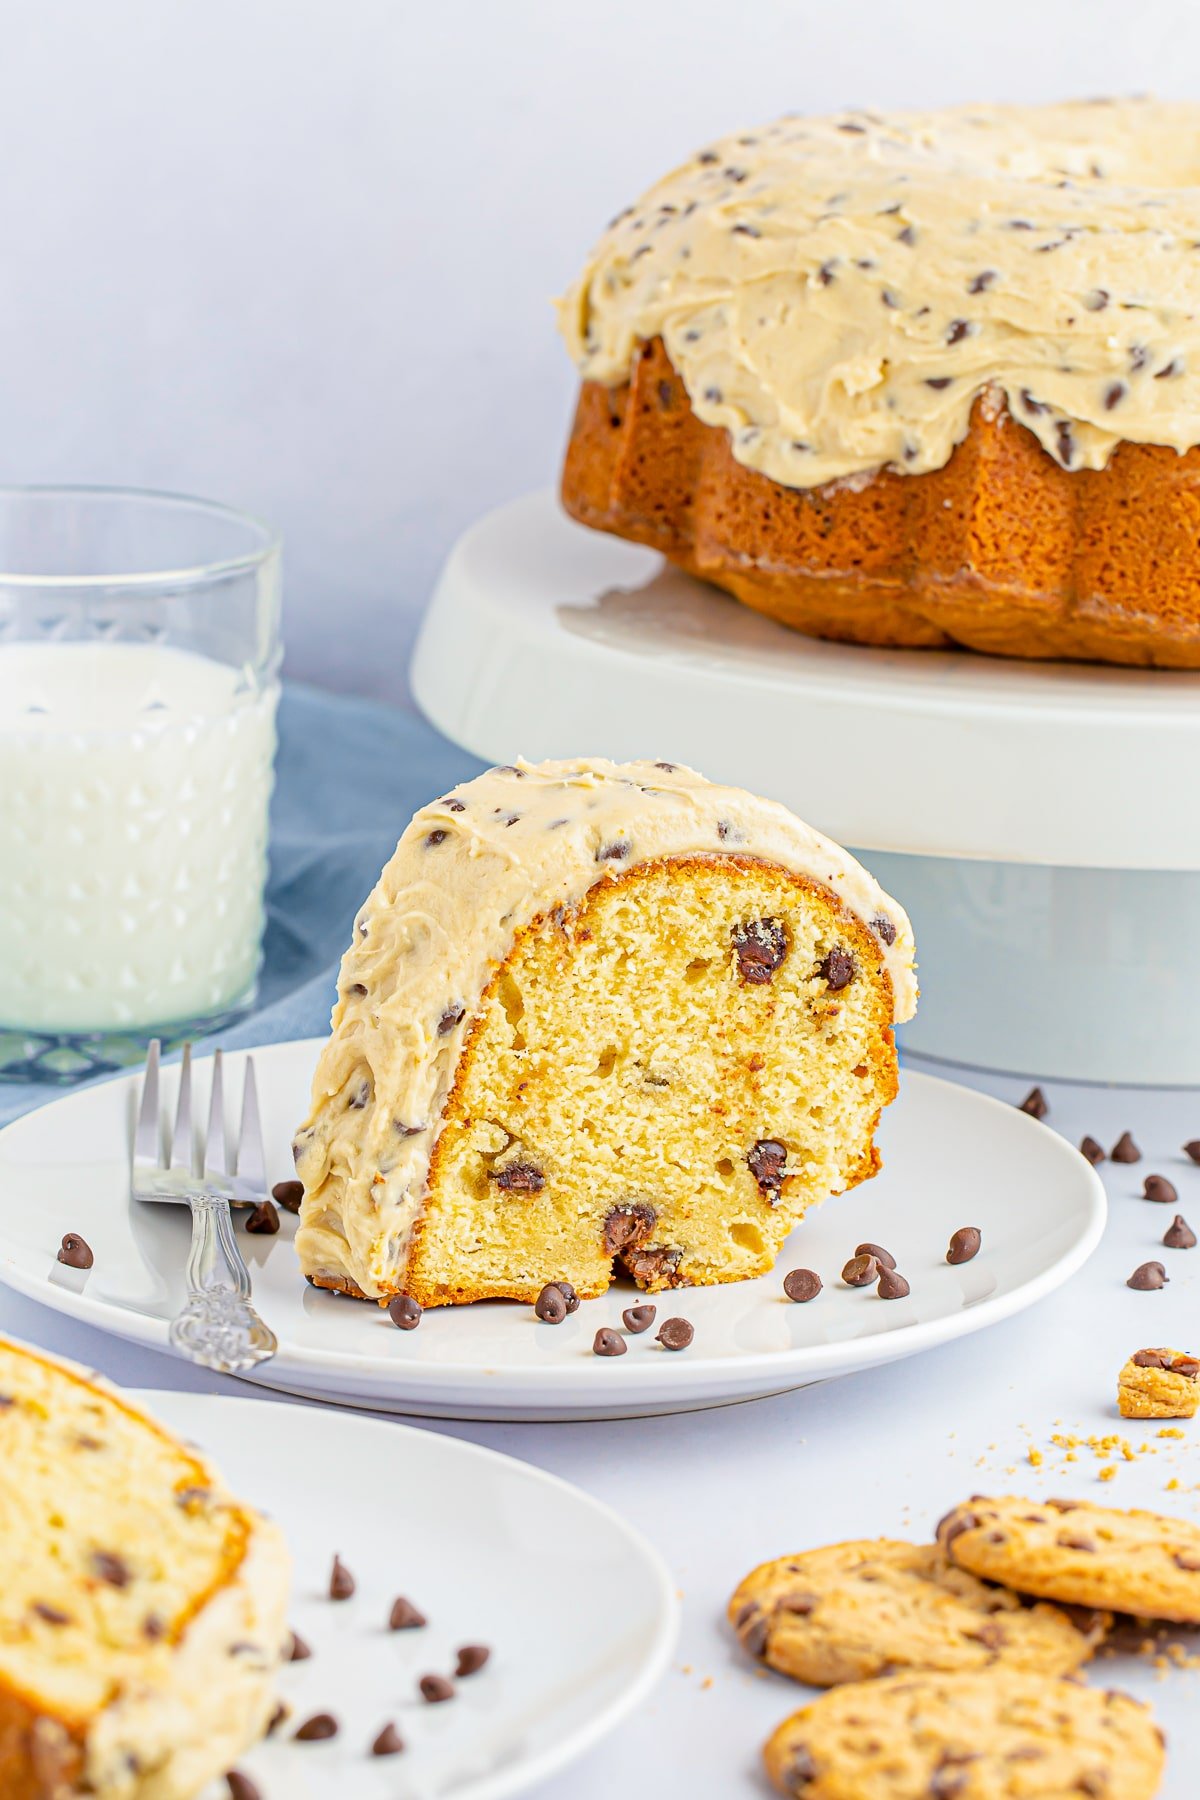 Slice of chocolate chip bundt cake on a white plate with silver fork, light blue linen in the background, glass of milk and bundt cake on cake stand